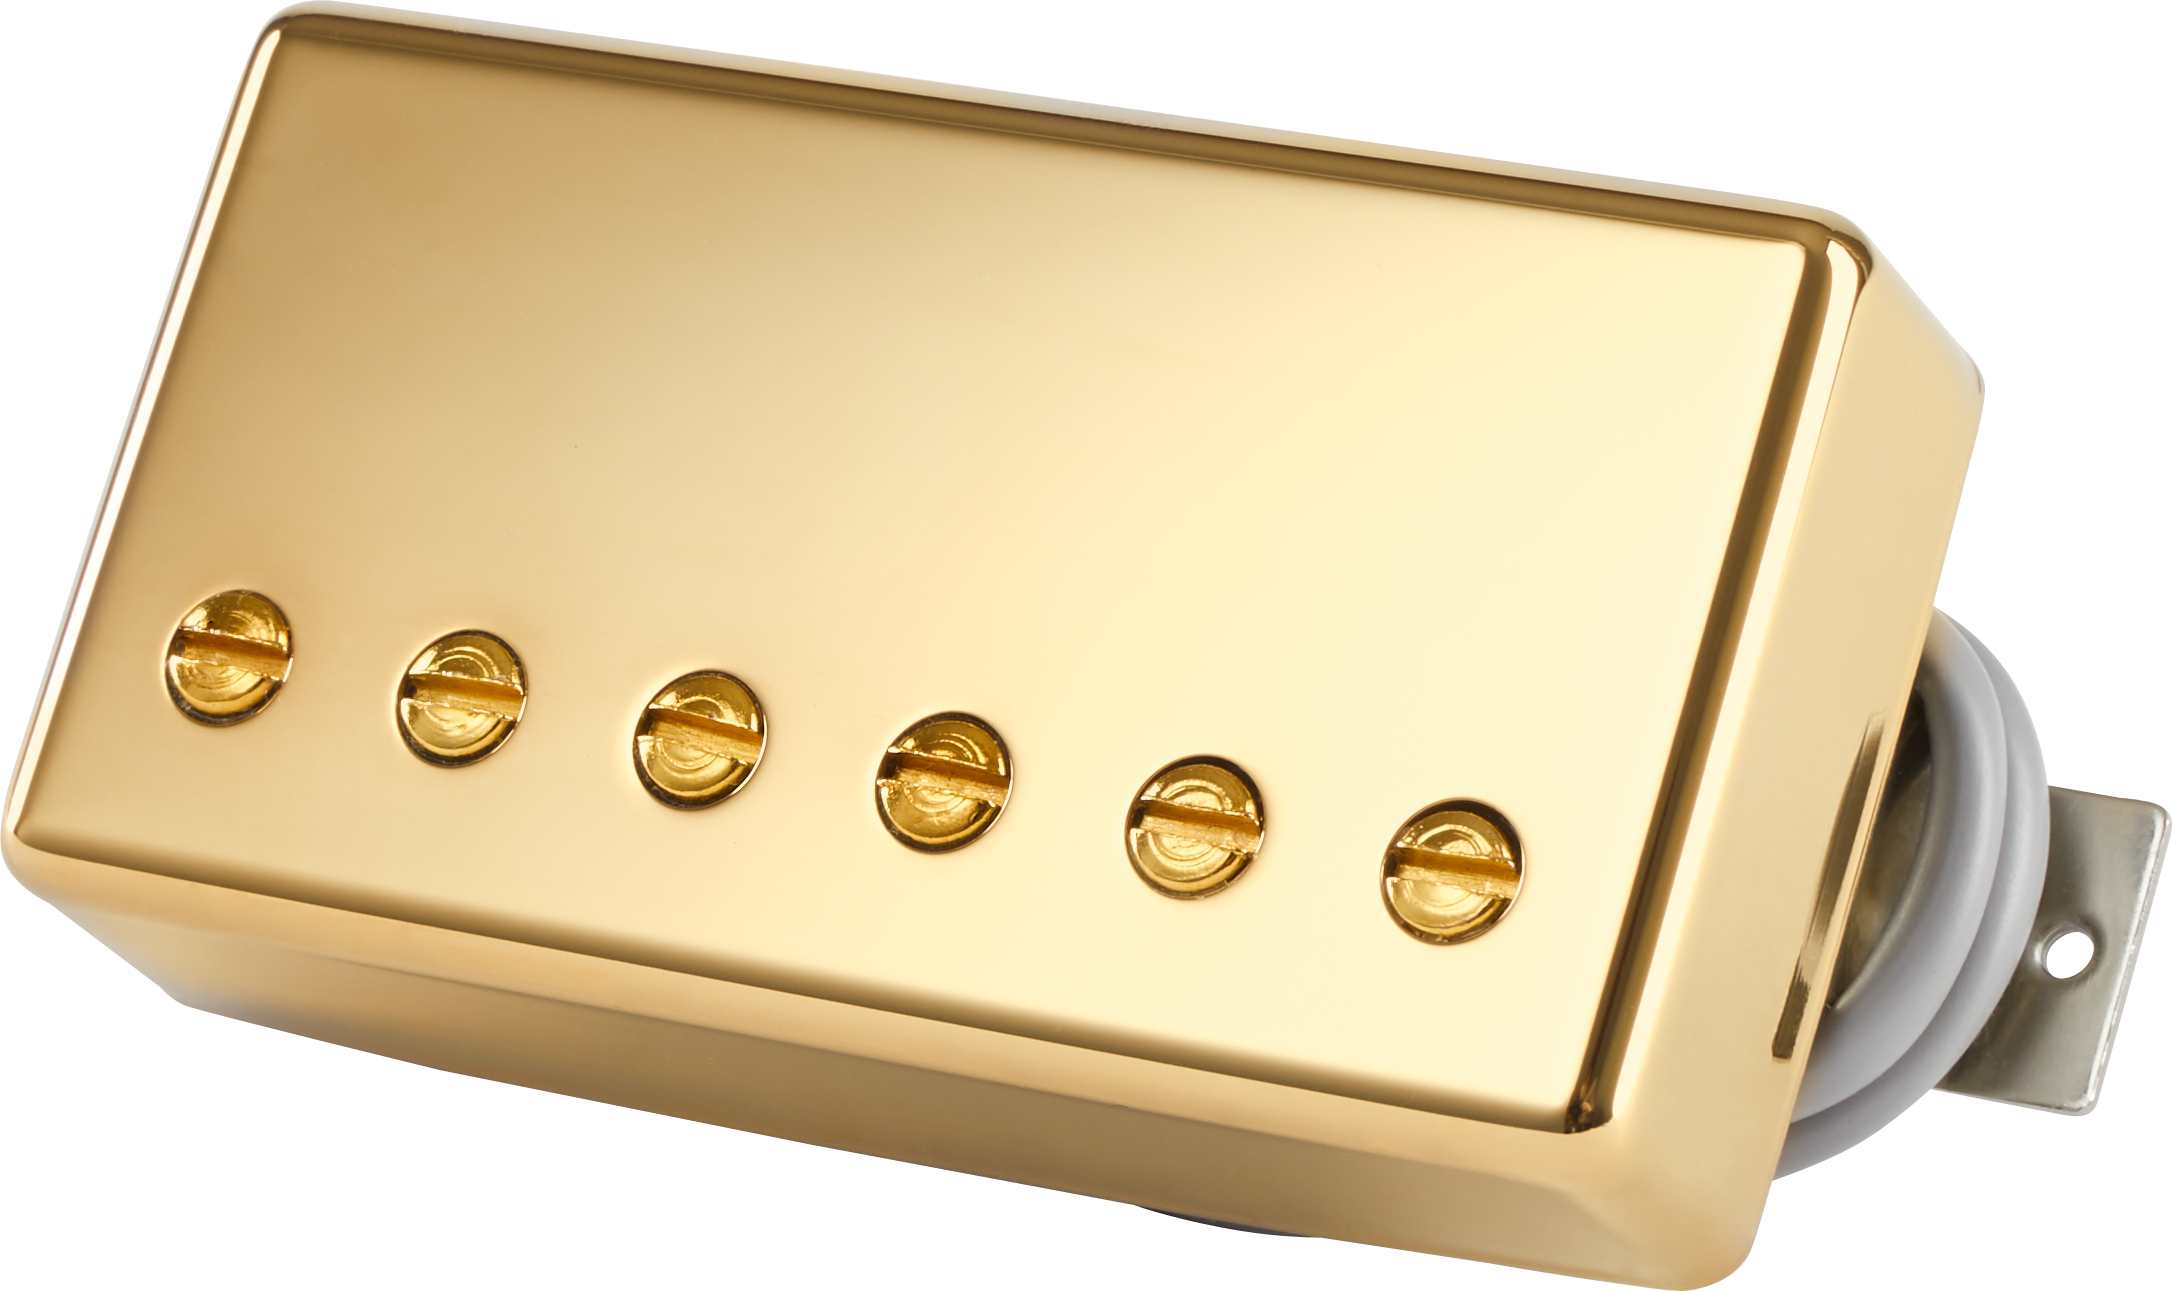 Gibson Accessories 498T Hot Alnico Bridge Humbucking Pickup - Gold |  Sweetwater